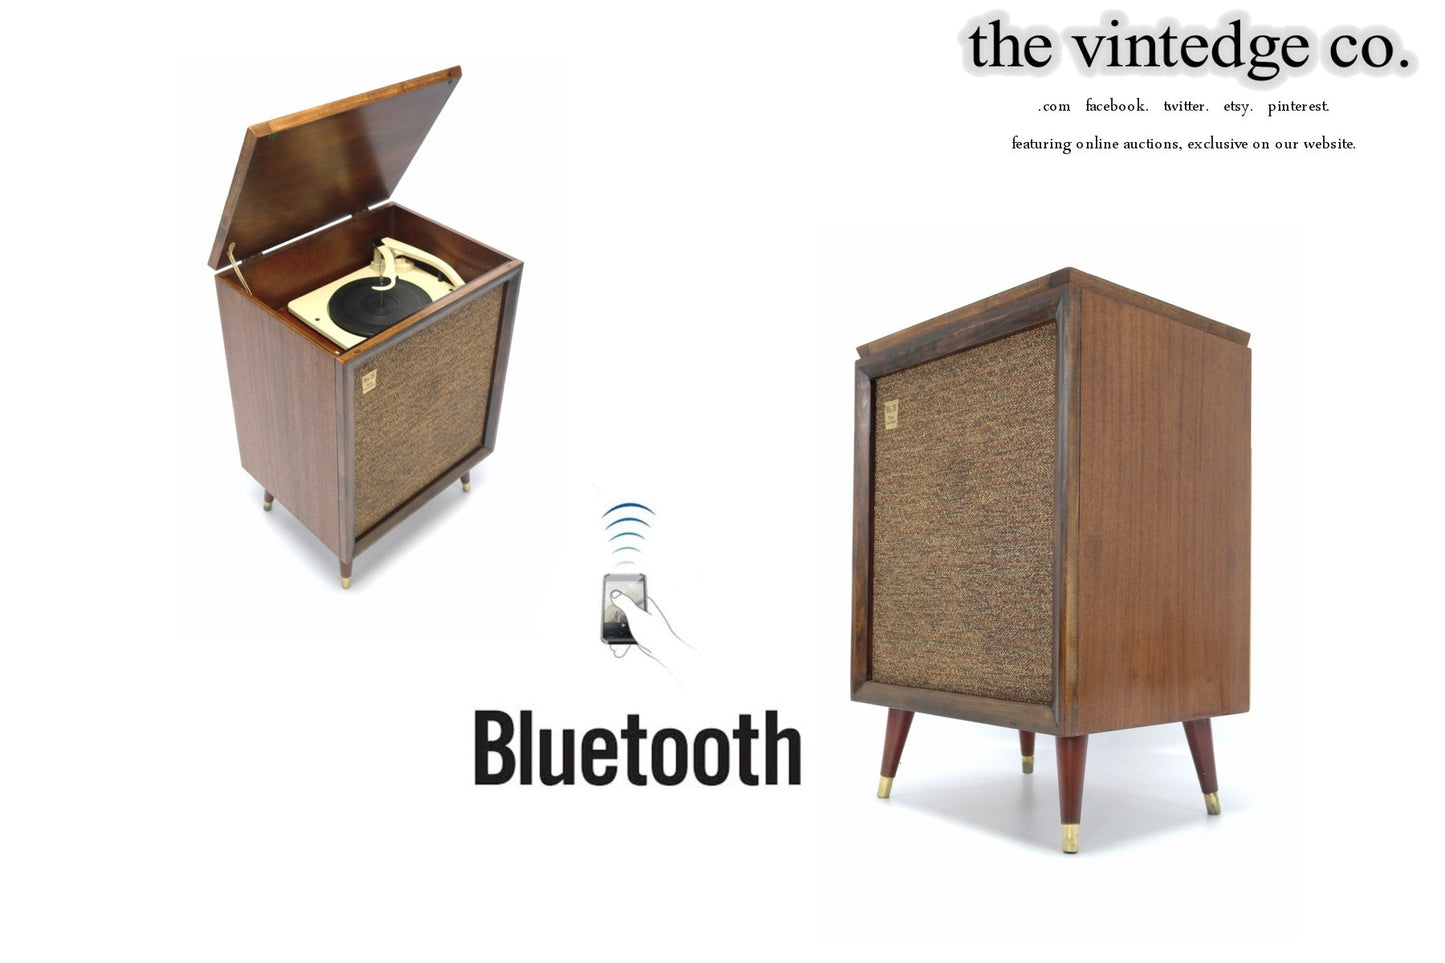 SOLD - MCM STEREO - 60's Mid Century Consolette Record Player - Bluetooth iPod iPhone Android Input AM/FM Tuner The Vintedge Co.